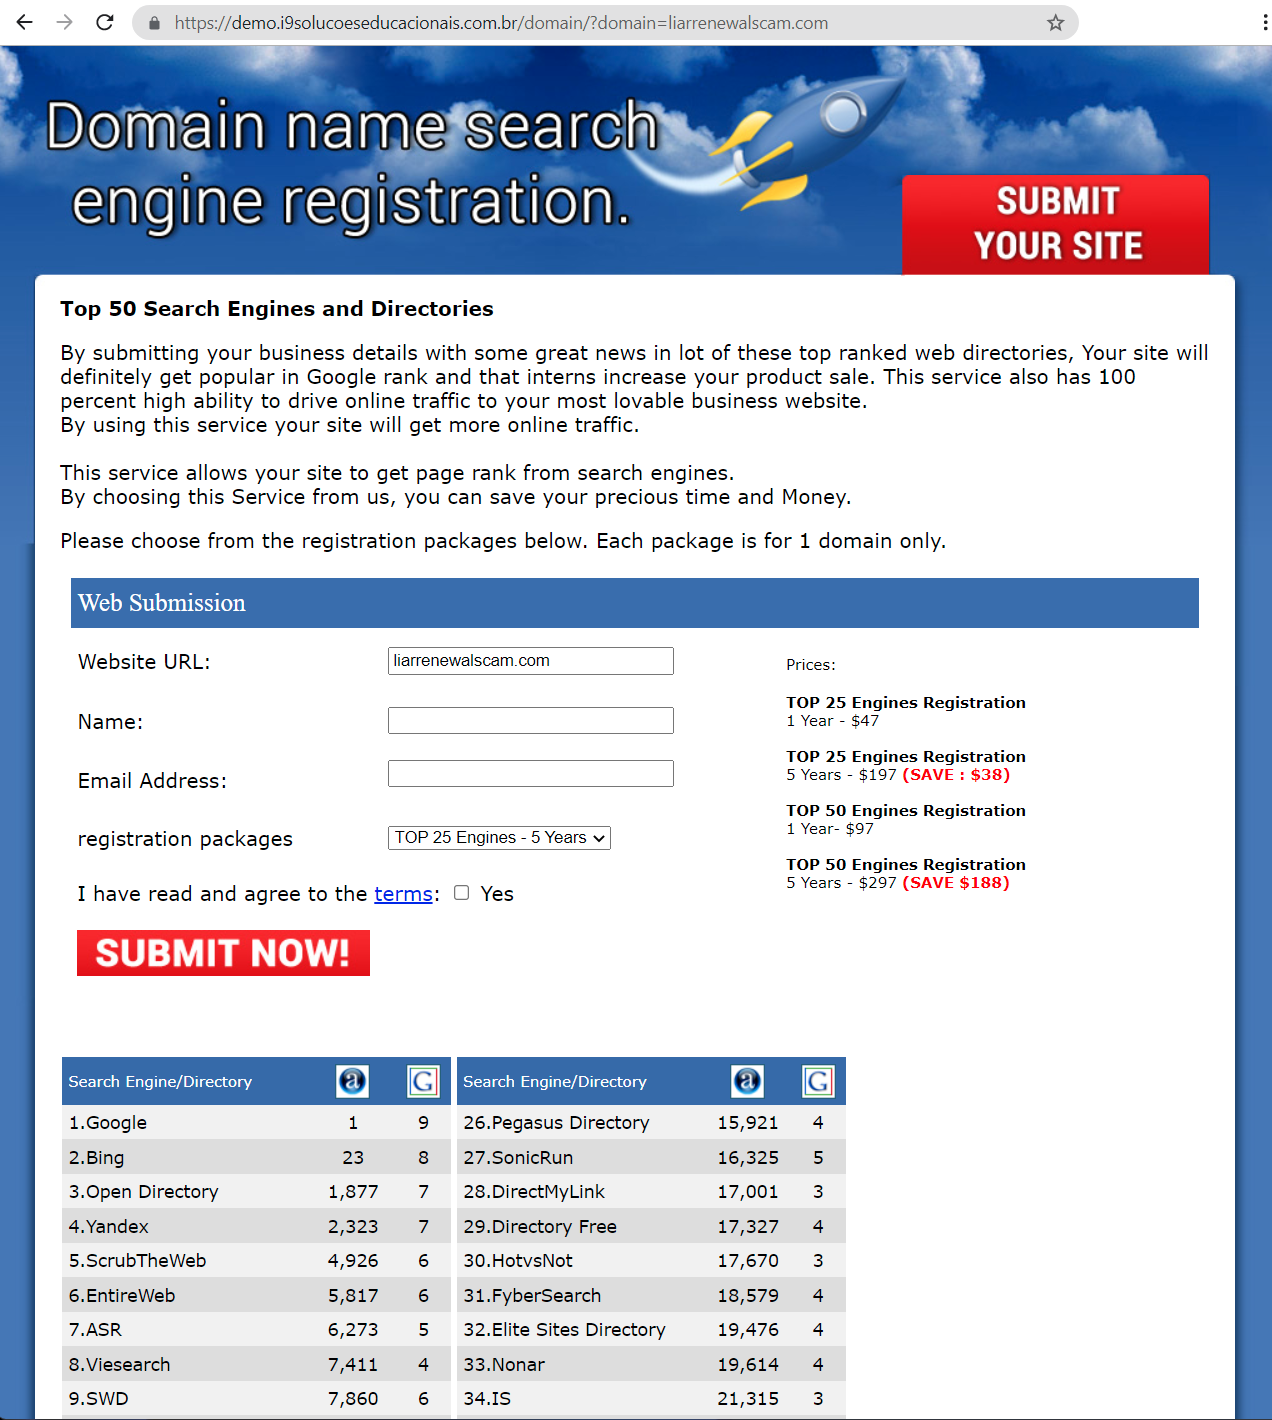 RE: Domain registration ✔ -  Watch out for domain renewal scams